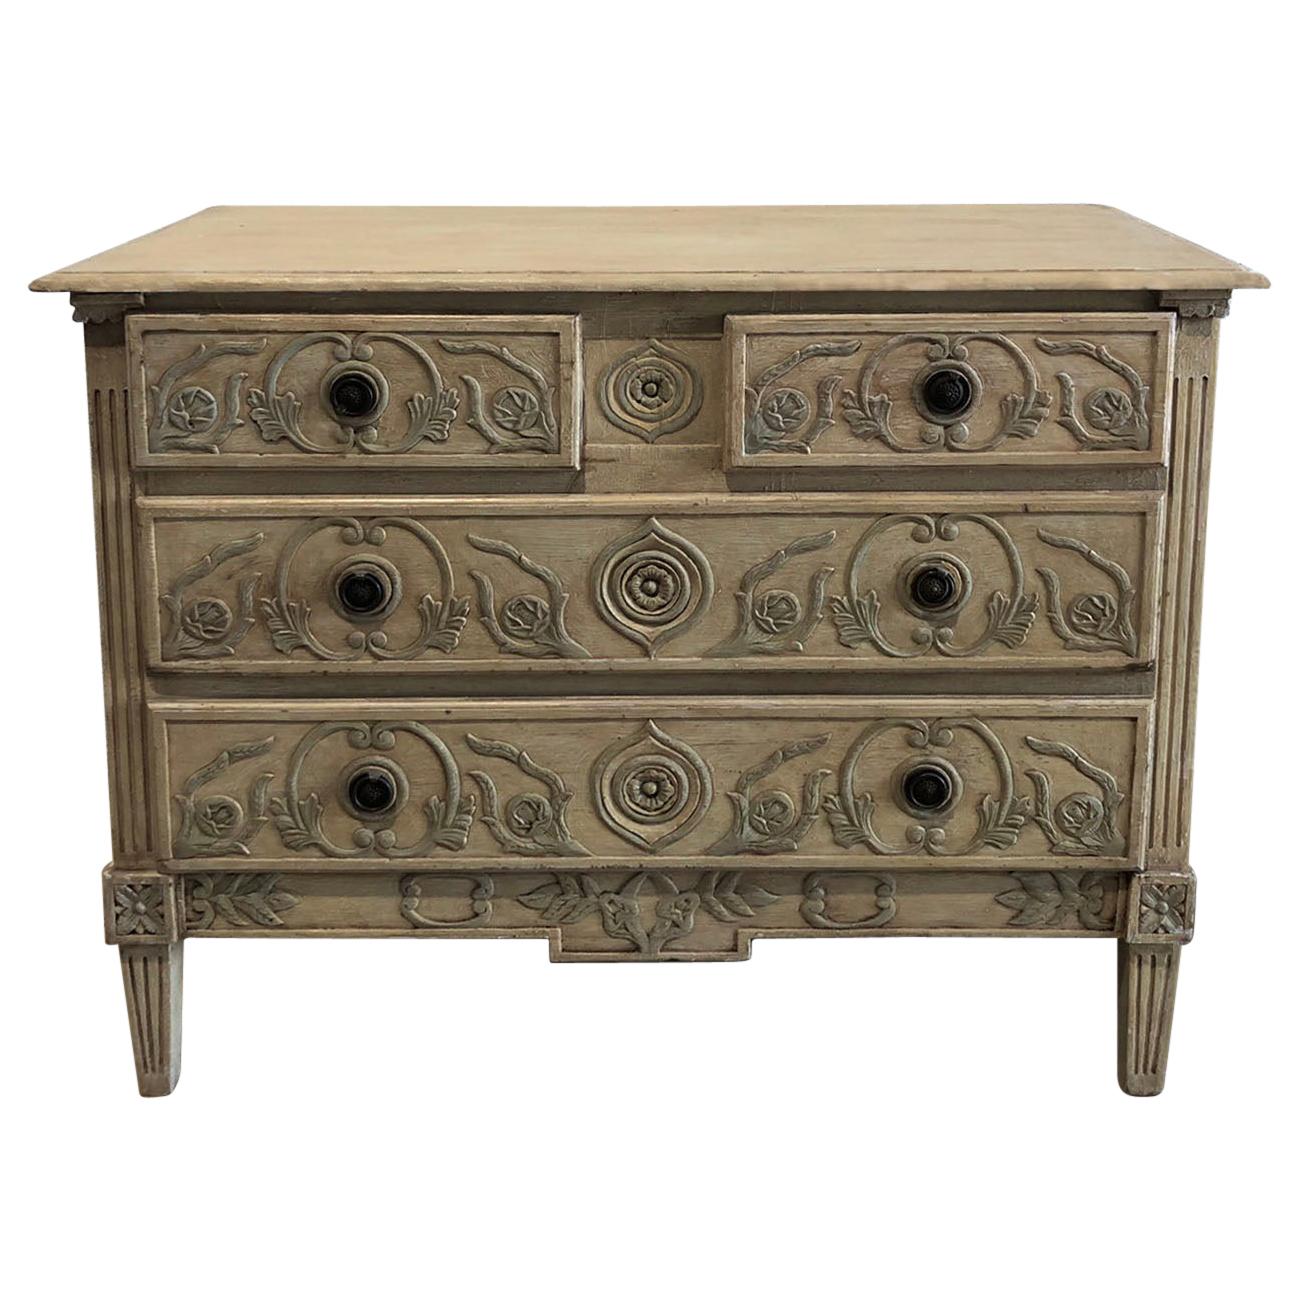 Louis XVI Provincial Creme and Grey Painted 3-Drawer Commode, Late 18th Century For Sale